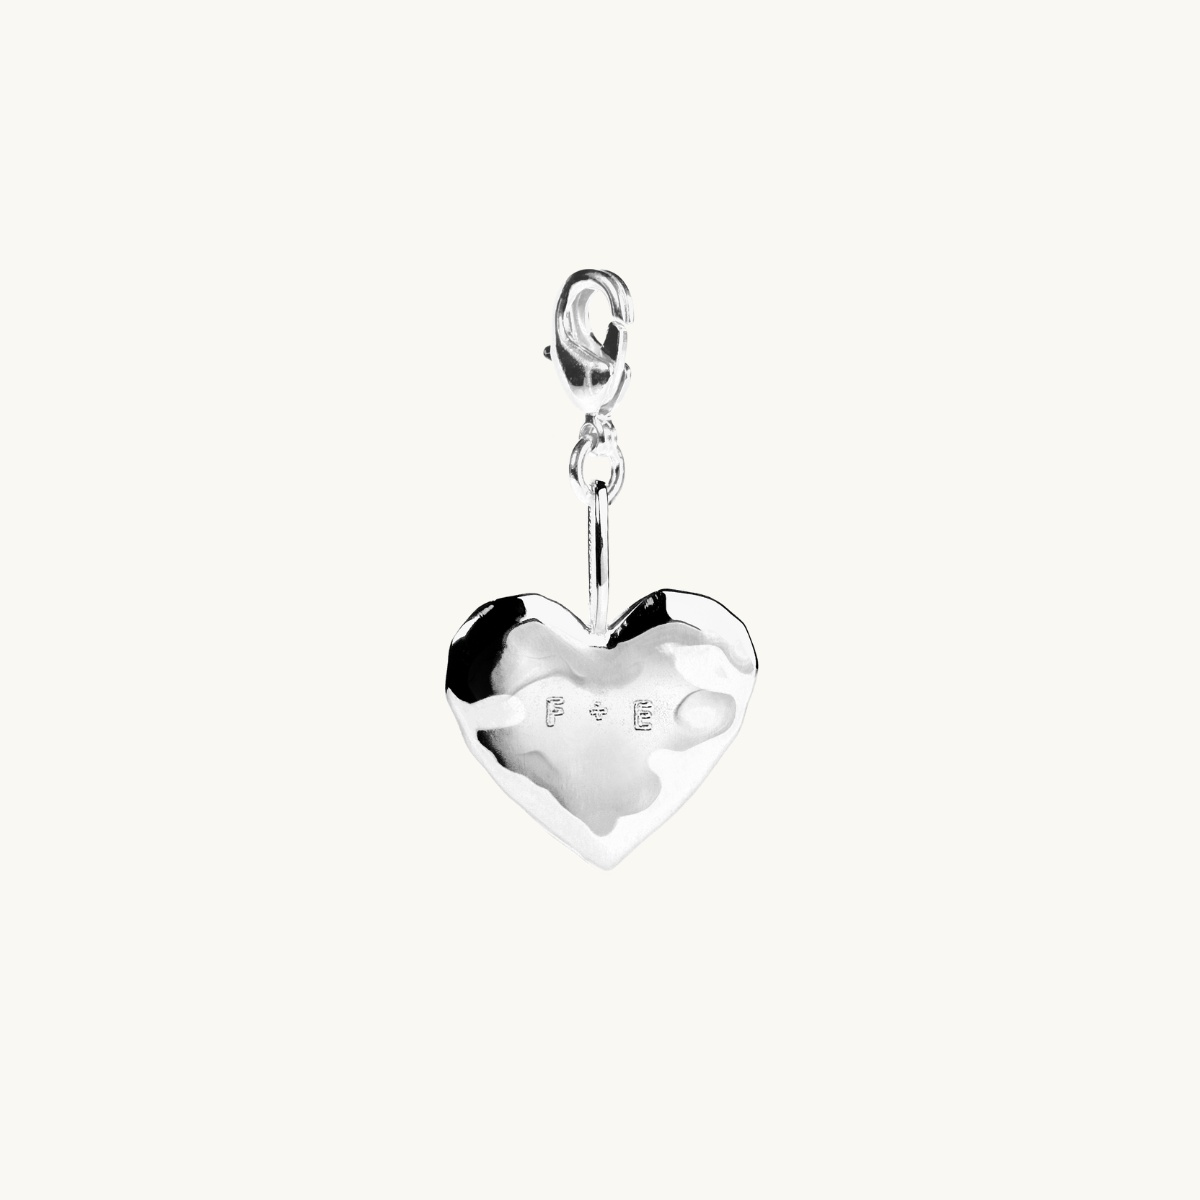 Pendant in silver in the shape of a heart with name engraving